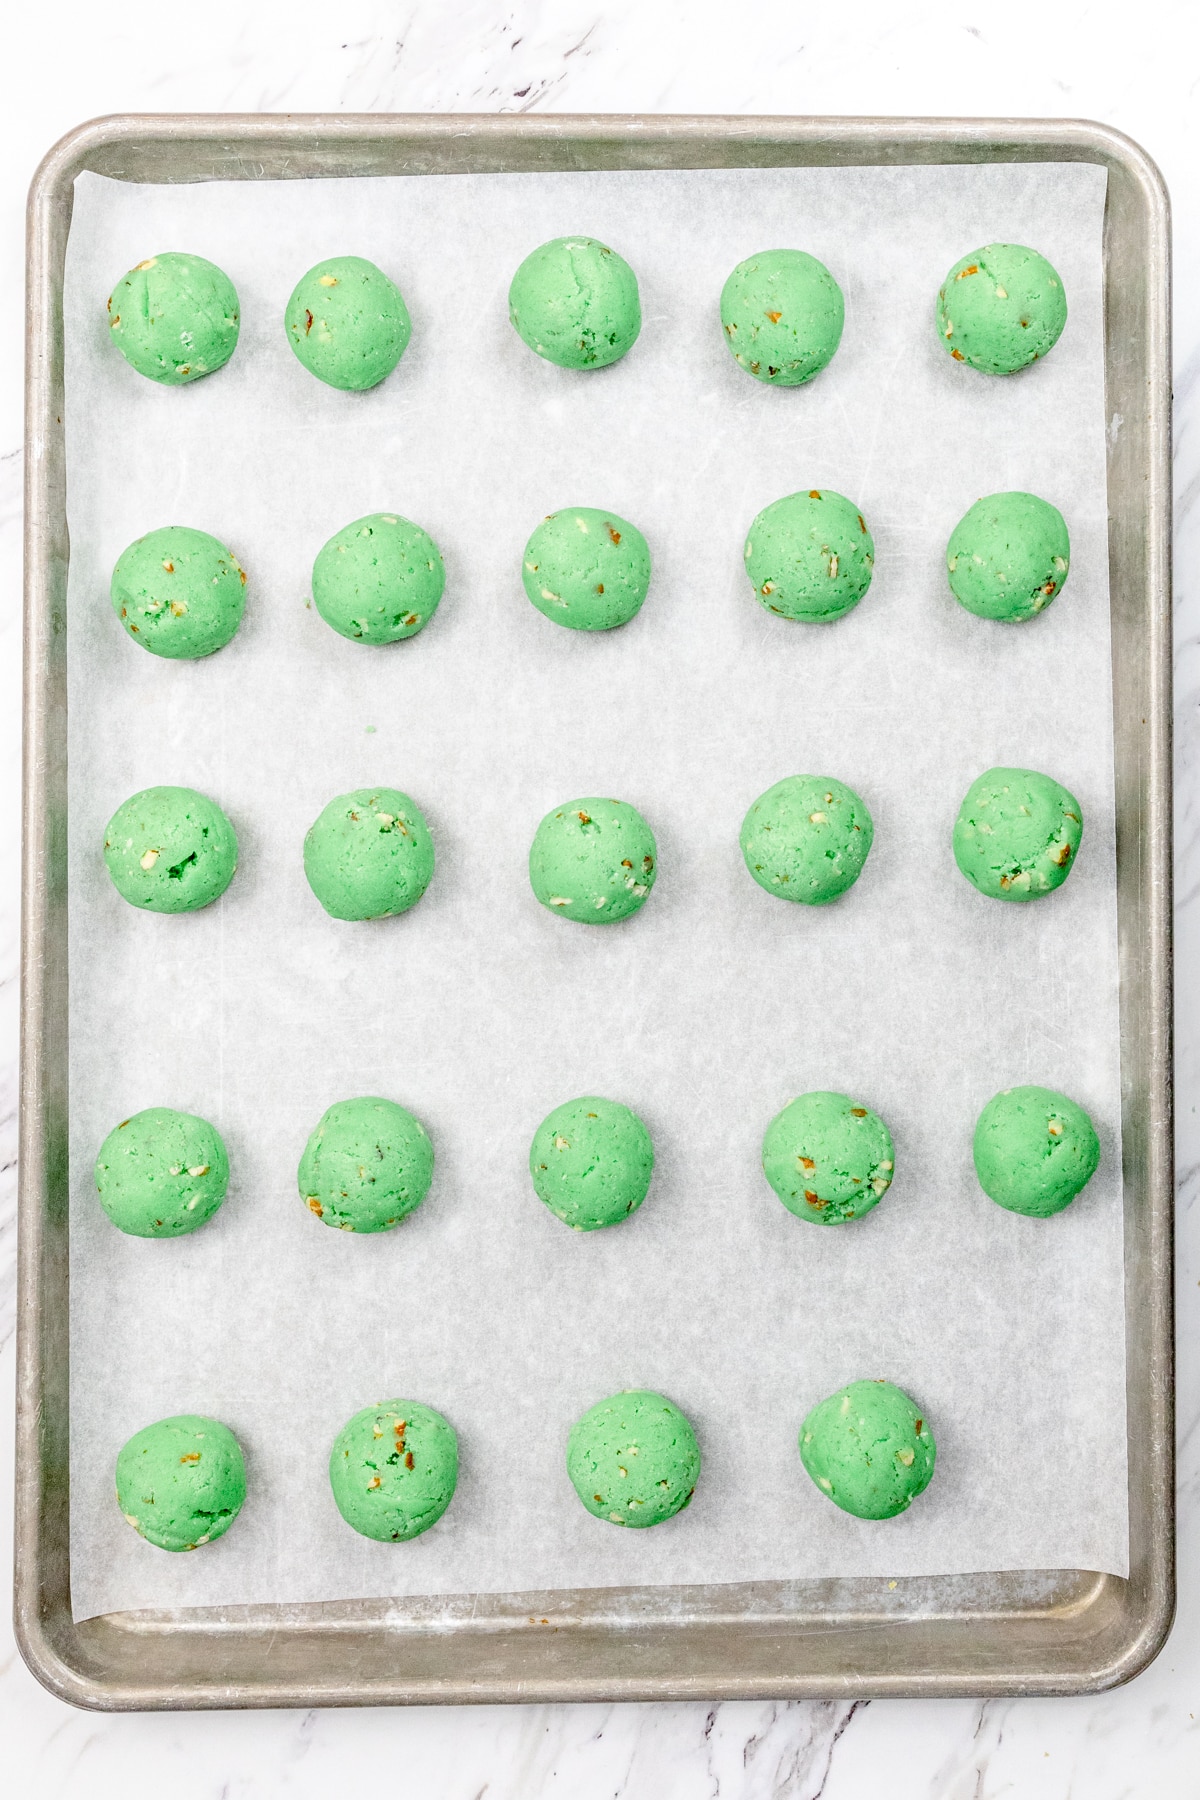 Top view of baking tray lined with parchment paper with Cookie dough balls on it.